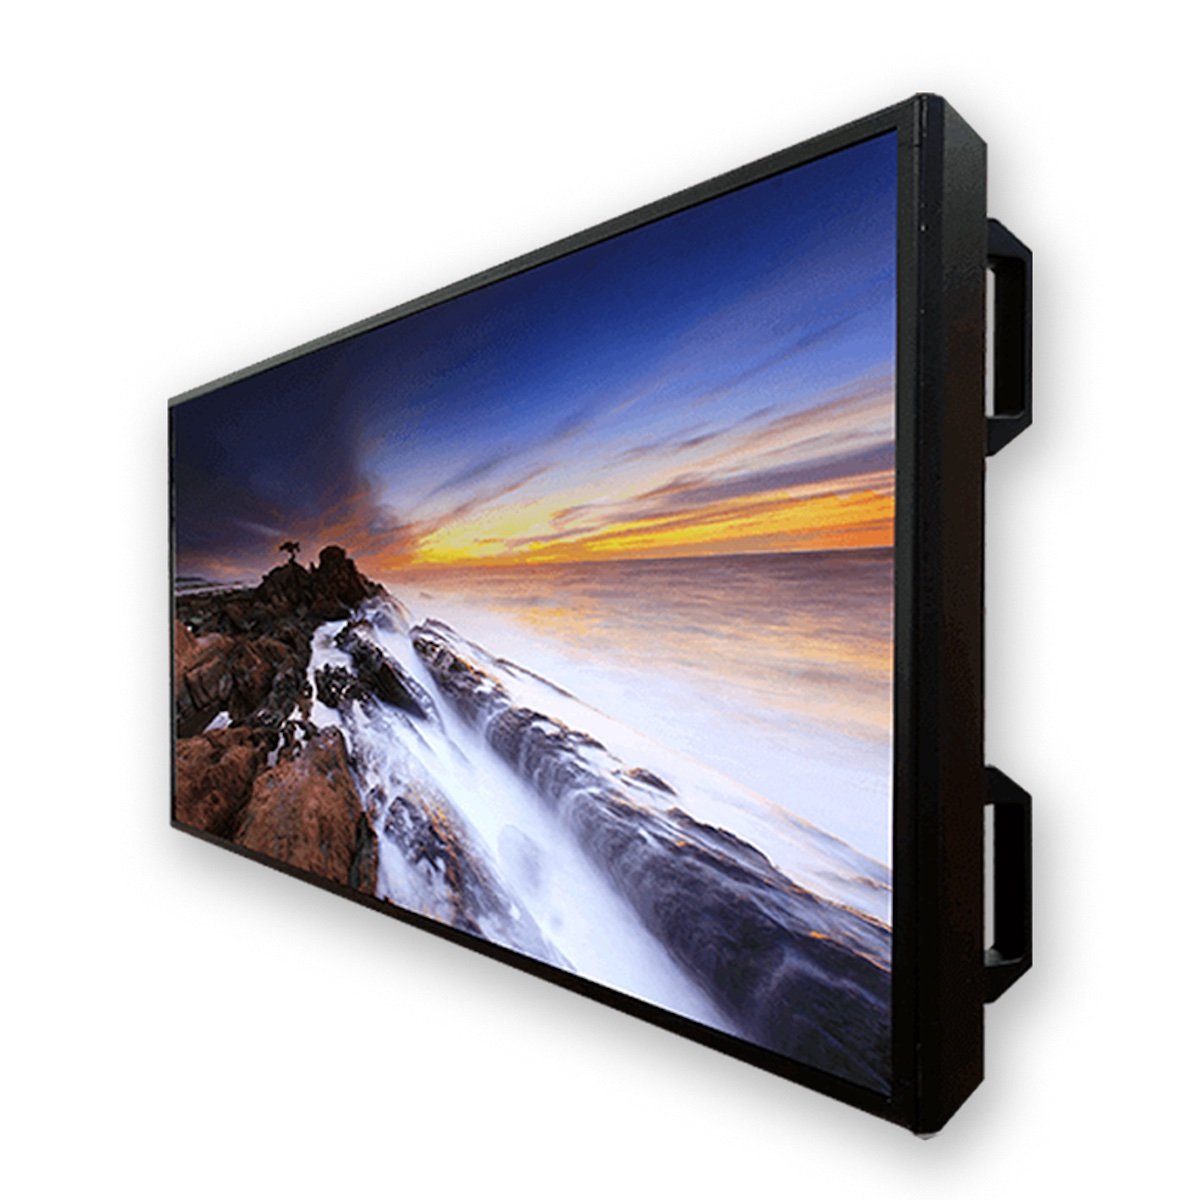 A high brightness LCD or monitor has various benefits. Here's everything you need to know.